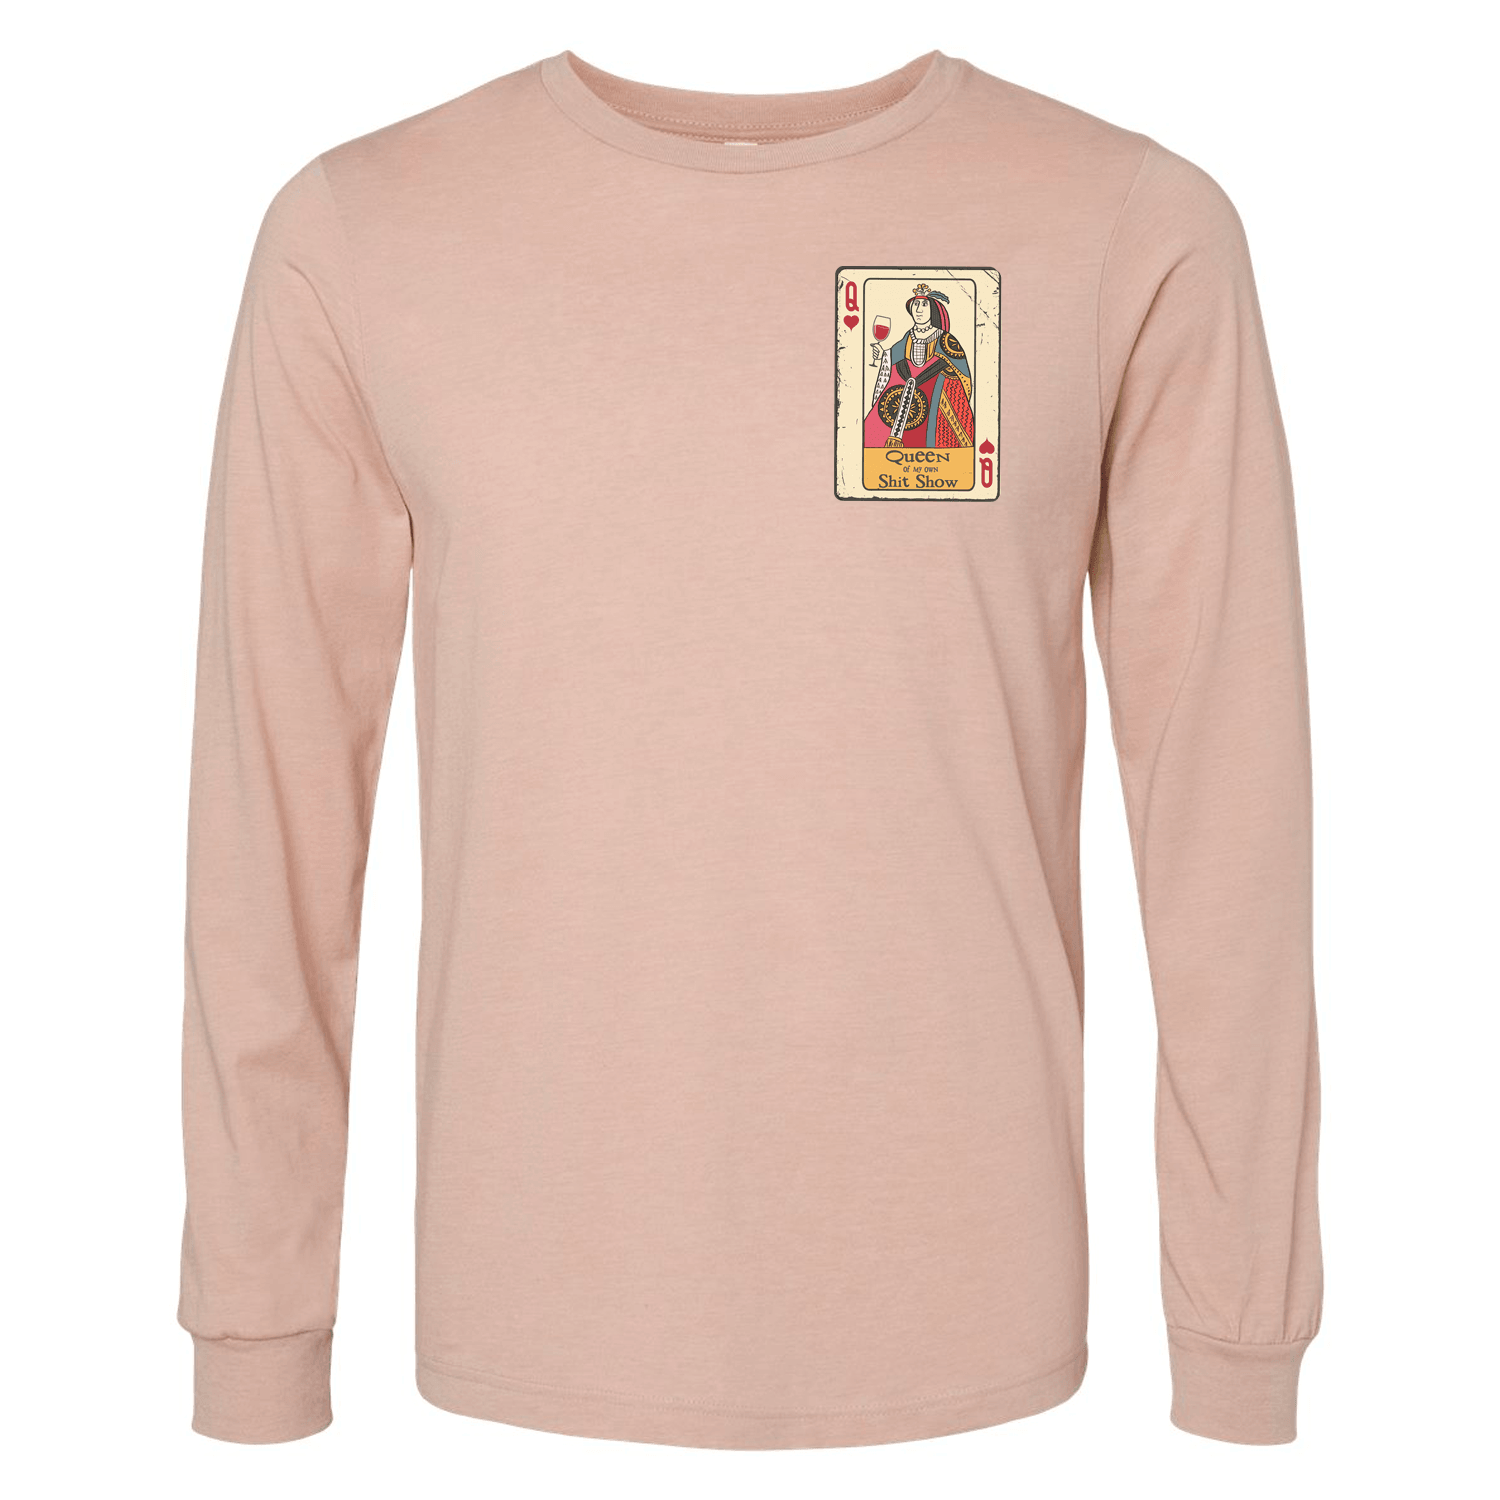 Queen of My own Sh** Show Long Sleeve - Ales to Trails